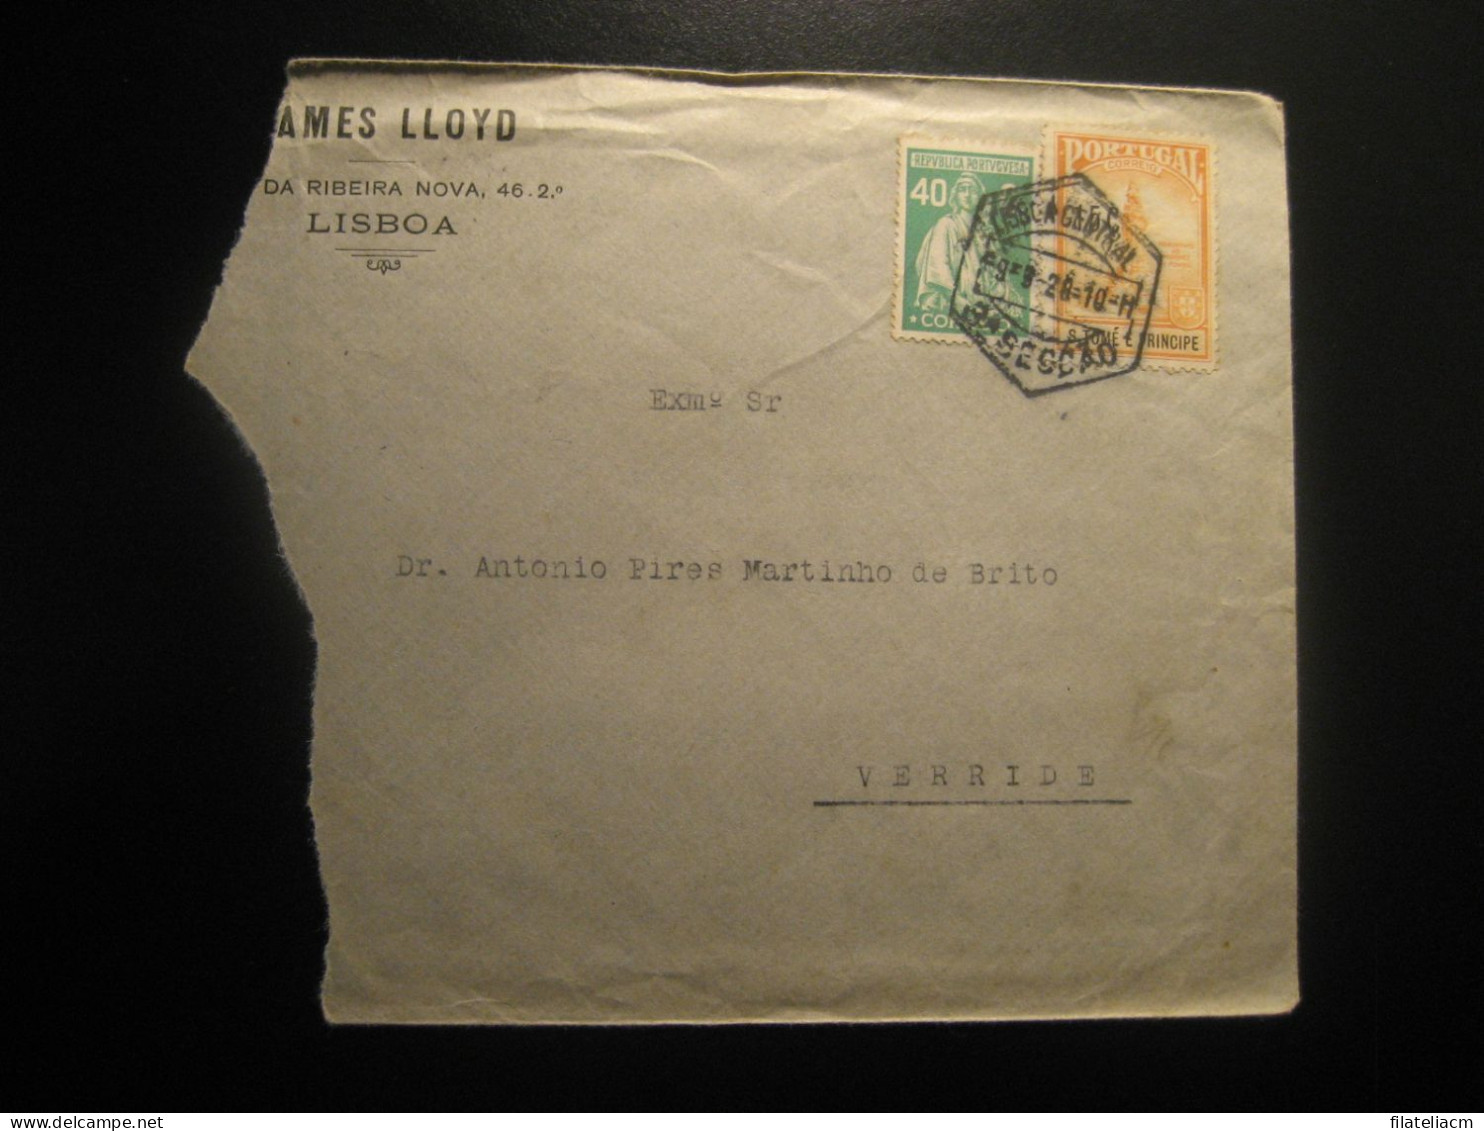 LISBOA Lloyd 1928 To VERRIDE Mixed Franking Stamp Pombal Damaged Cancel Cover Portuguese Colonies Portugal Guinea Area - St. Thomas & Prince